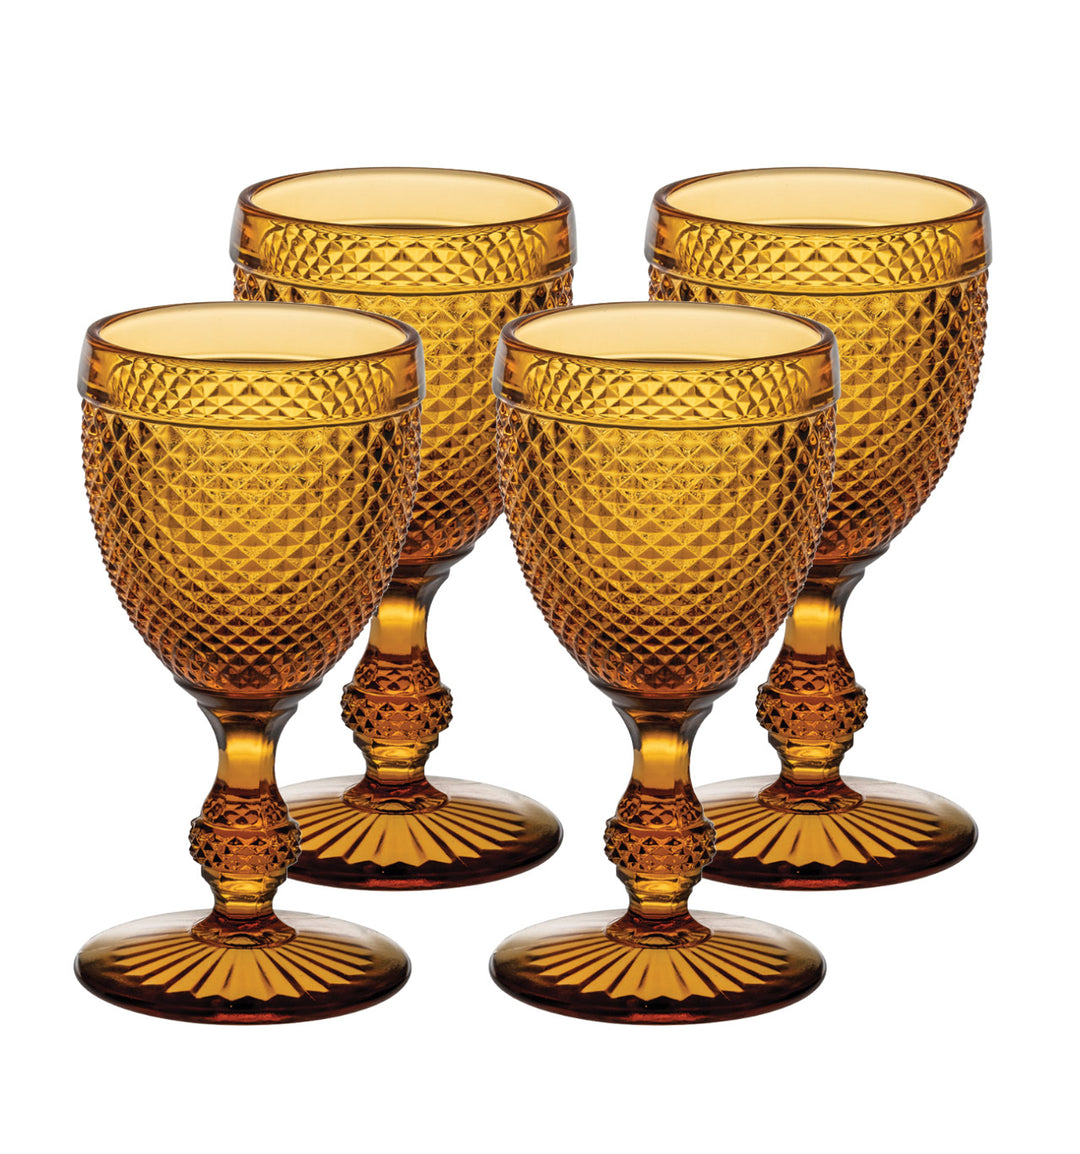 Bicos Ambar Set Of 4 Water Goblets